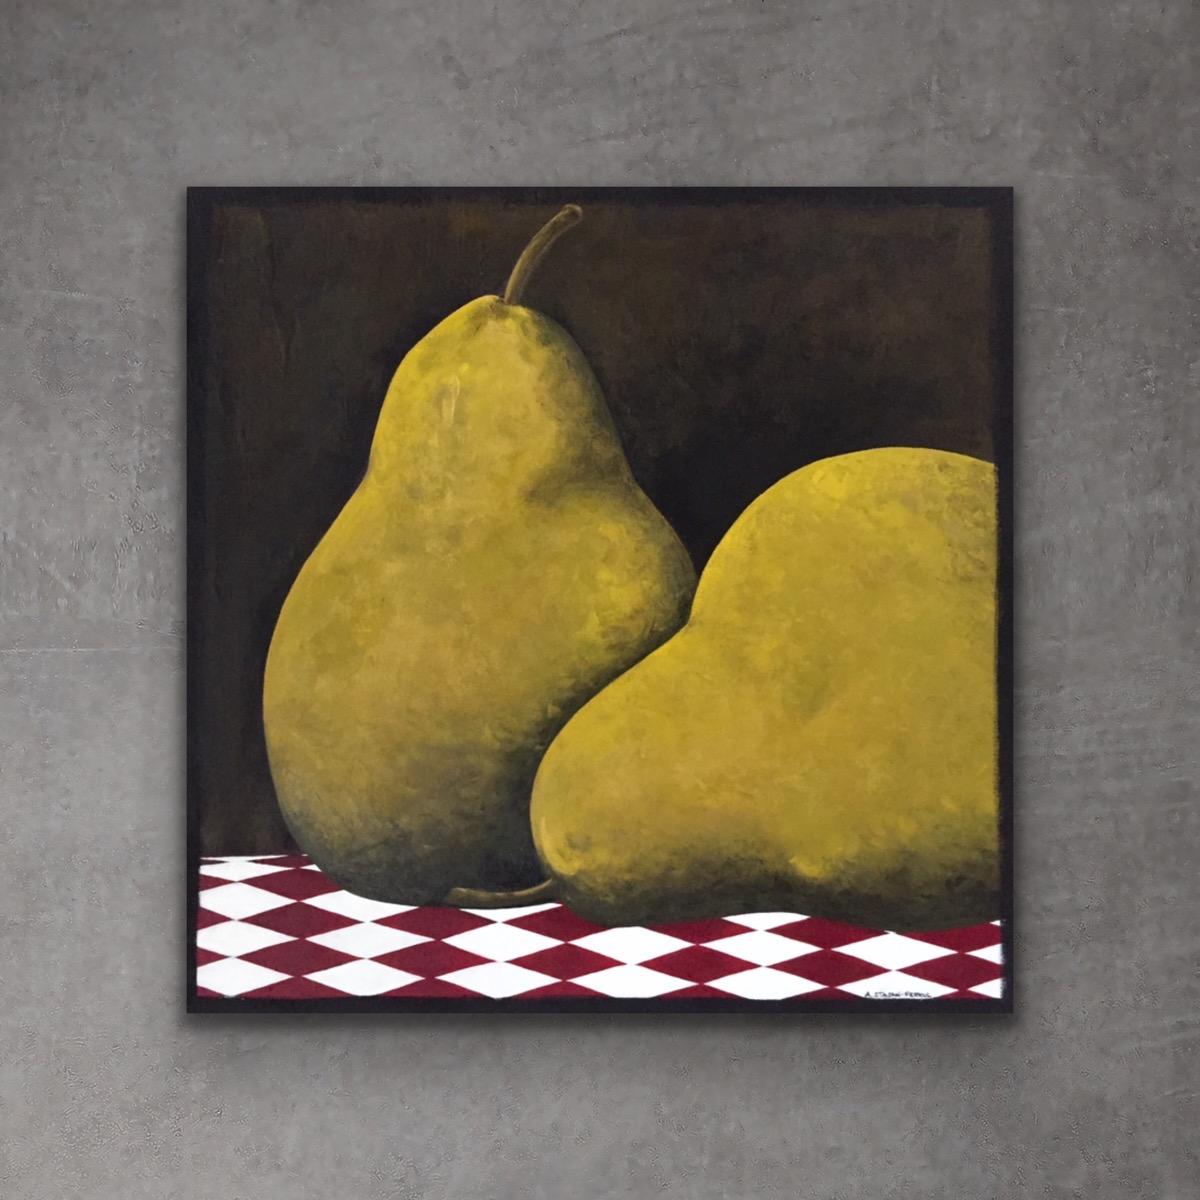 Pear Shape - 30"x30", Pear Painting, Yellow, Black, Red